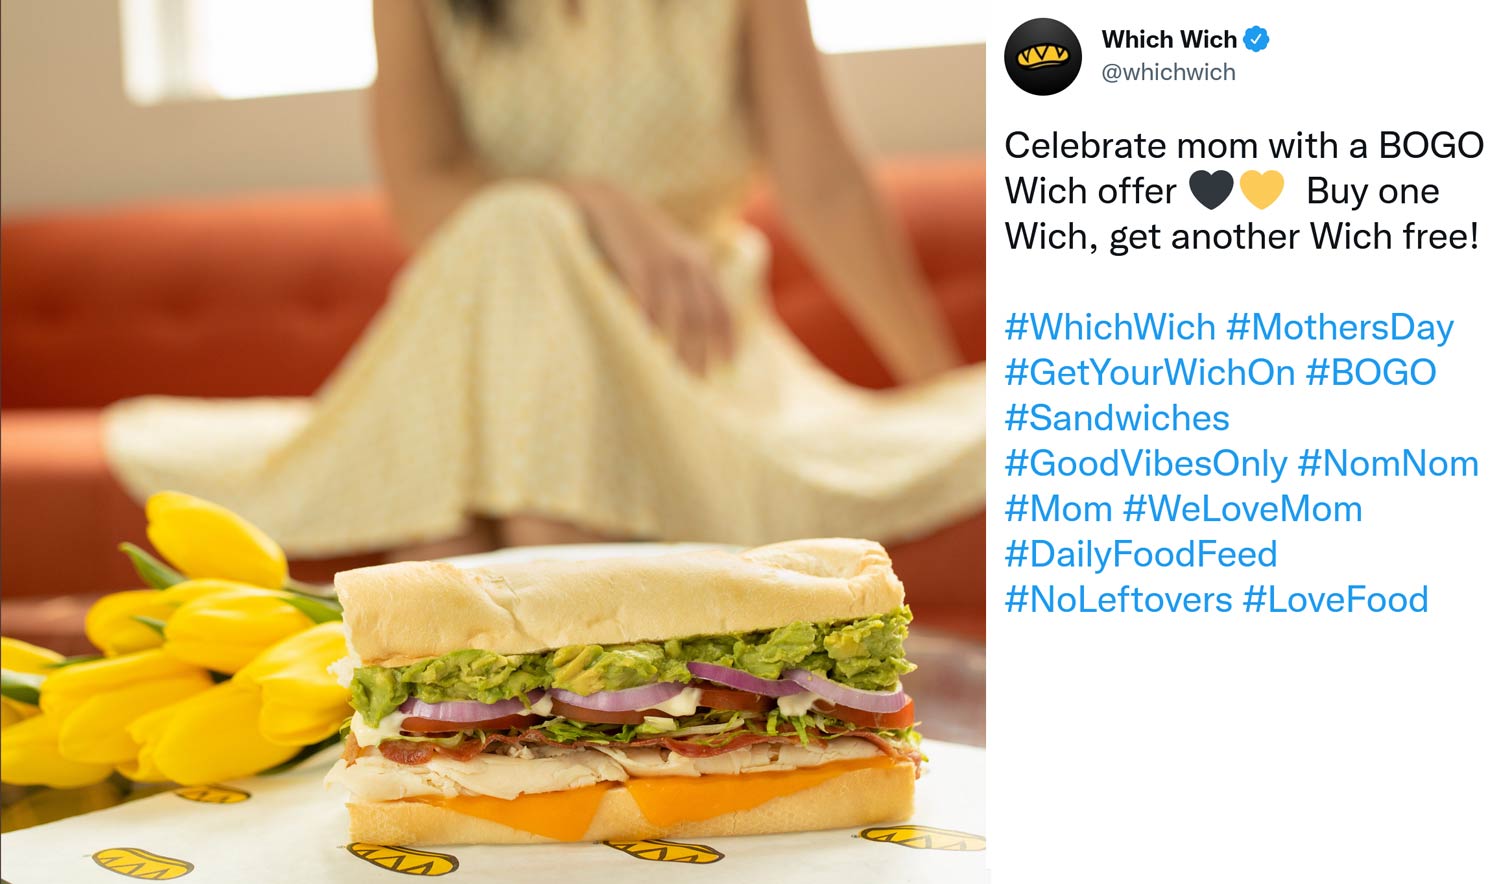 Which Wich restaurants Coupon  Second sandwich free for mom today at Which Wich #whichwich 